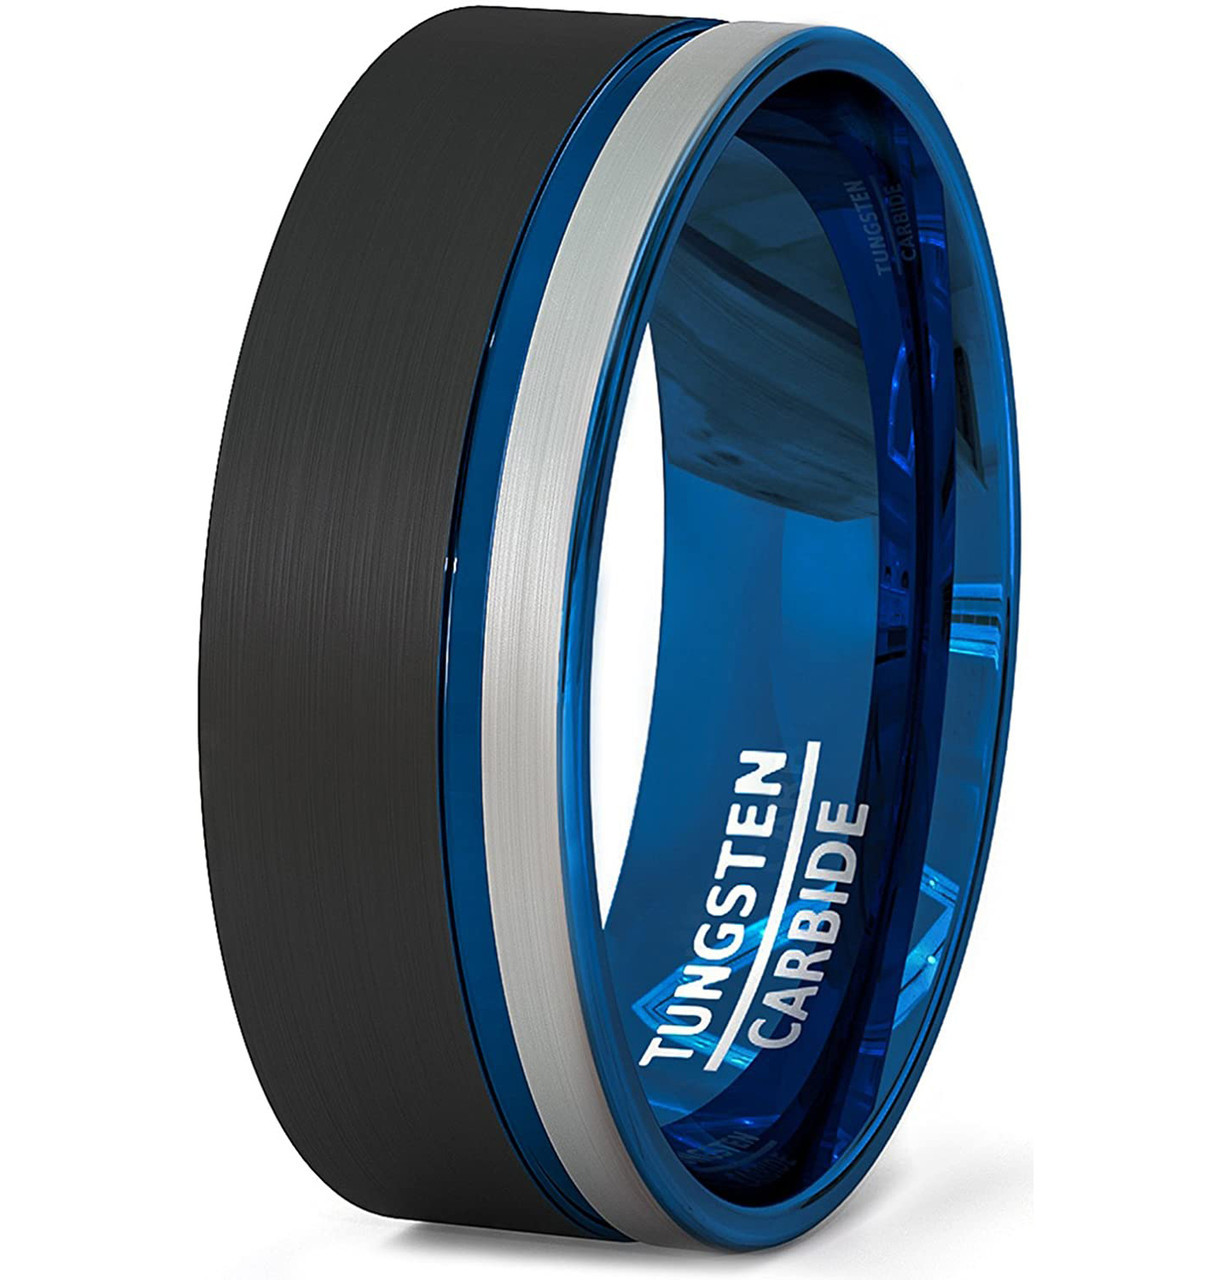 Men's Tungsten Wedding Band (8mm). Triple Tone Black, Blue and Gray Tone Striped Pattern. Tungsten Ring Comfort Fit